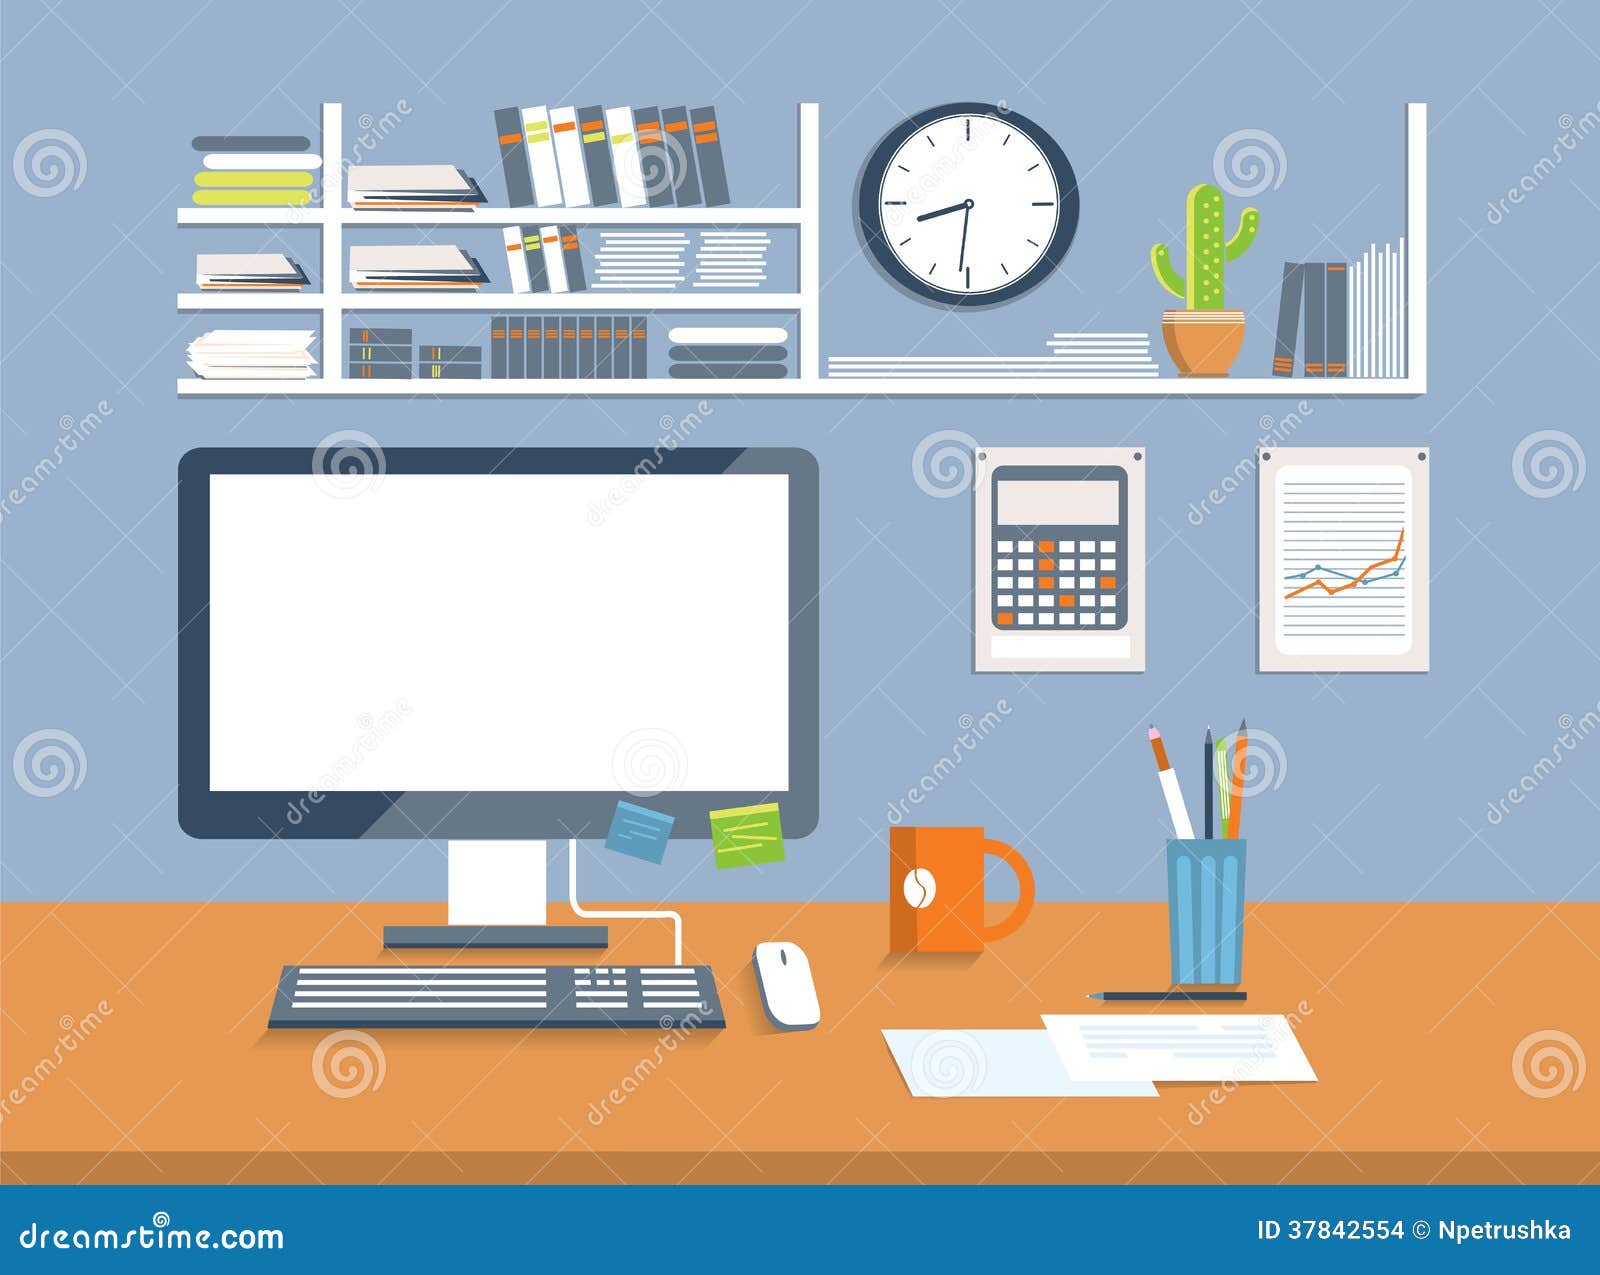 office room clipart - photo #14